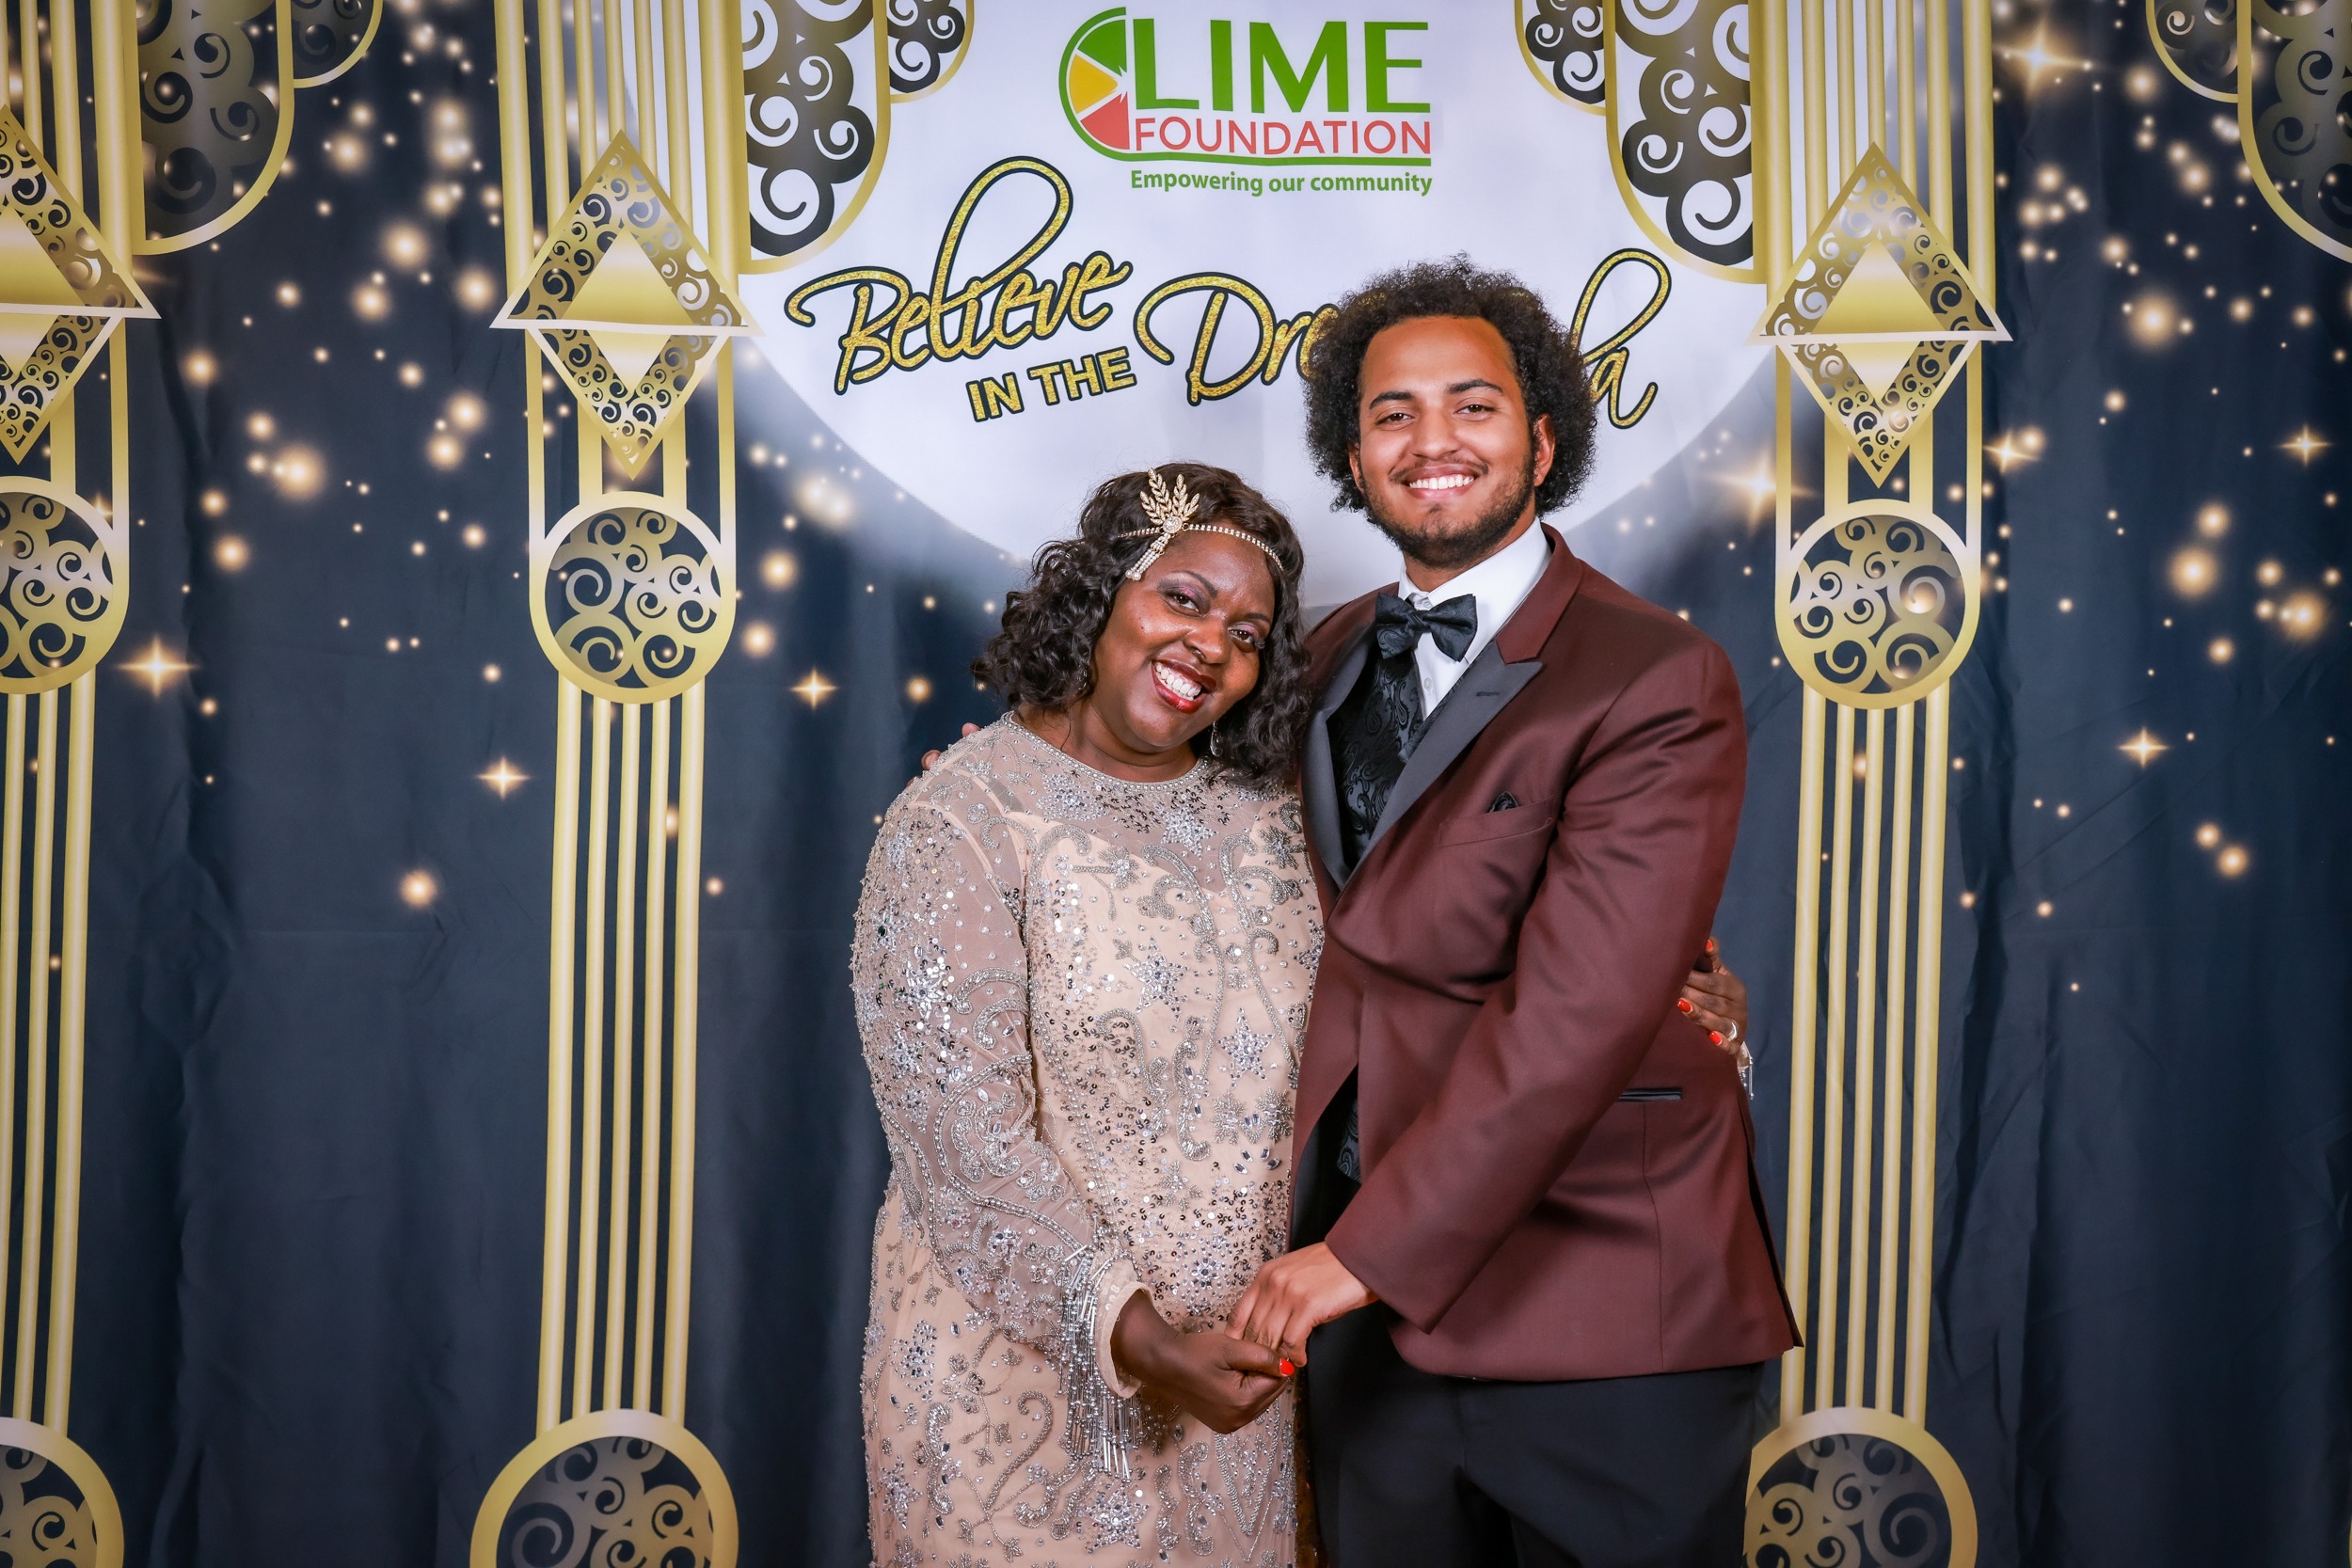 A man and woman posing for a photo at a party hosted by The LIME Foundation.